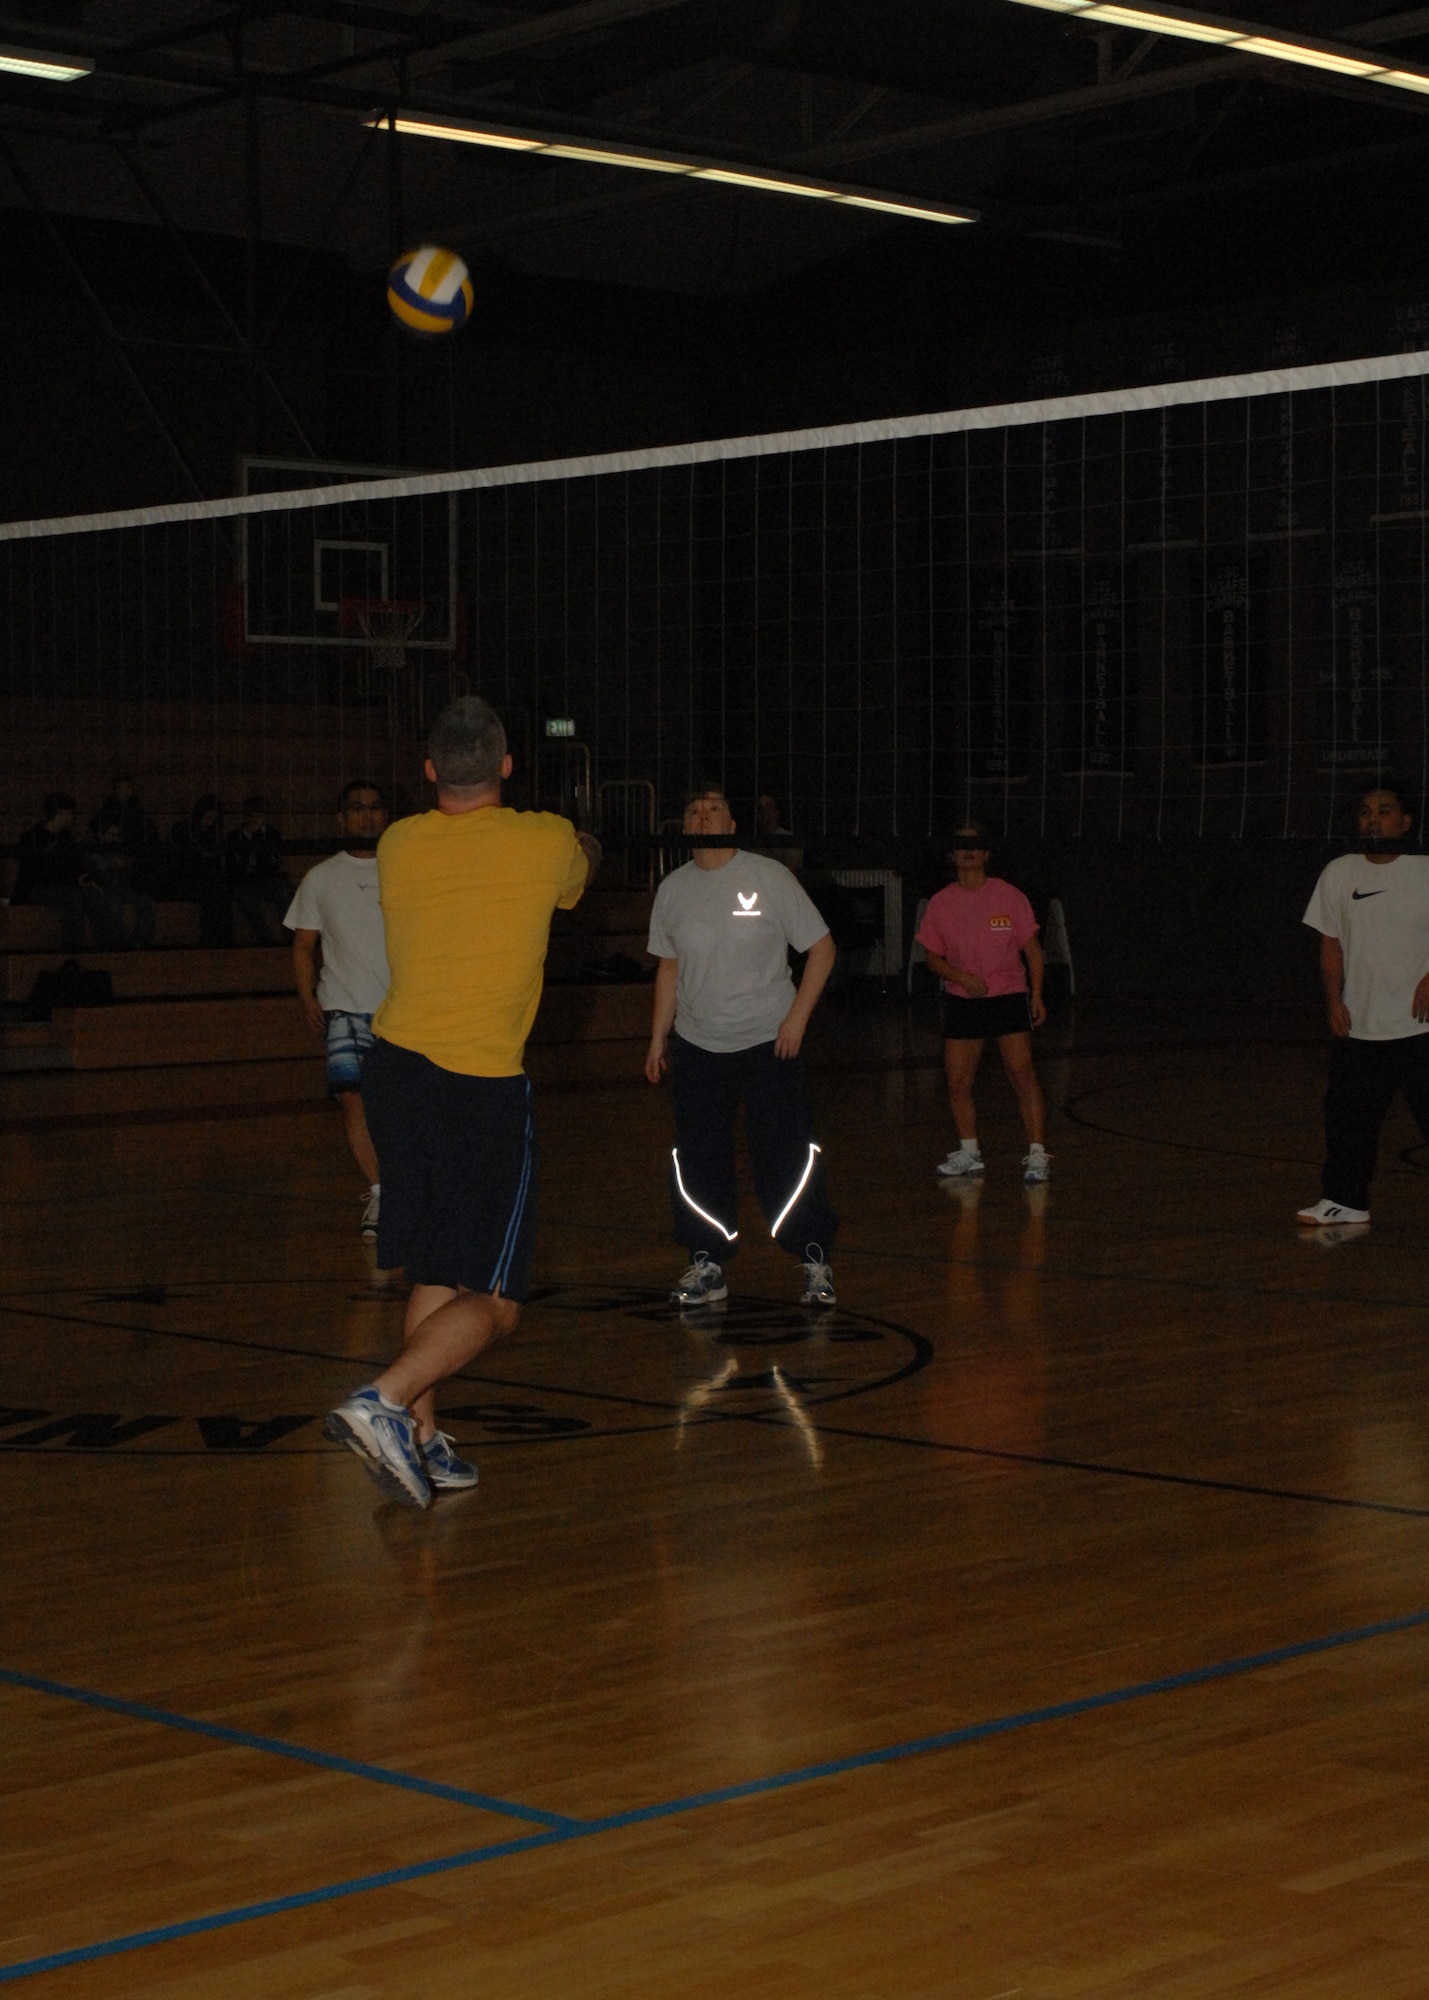 SPANGDAHLEM AIR BASE, Germany -- Tier II and Top 3 compete in a volleyball game during lunch at the Skelton Memorial Fitness Center Jan. 25, 2008. (U.S. Air Force photo/Airman 1st Class Jenifer Calhoun)